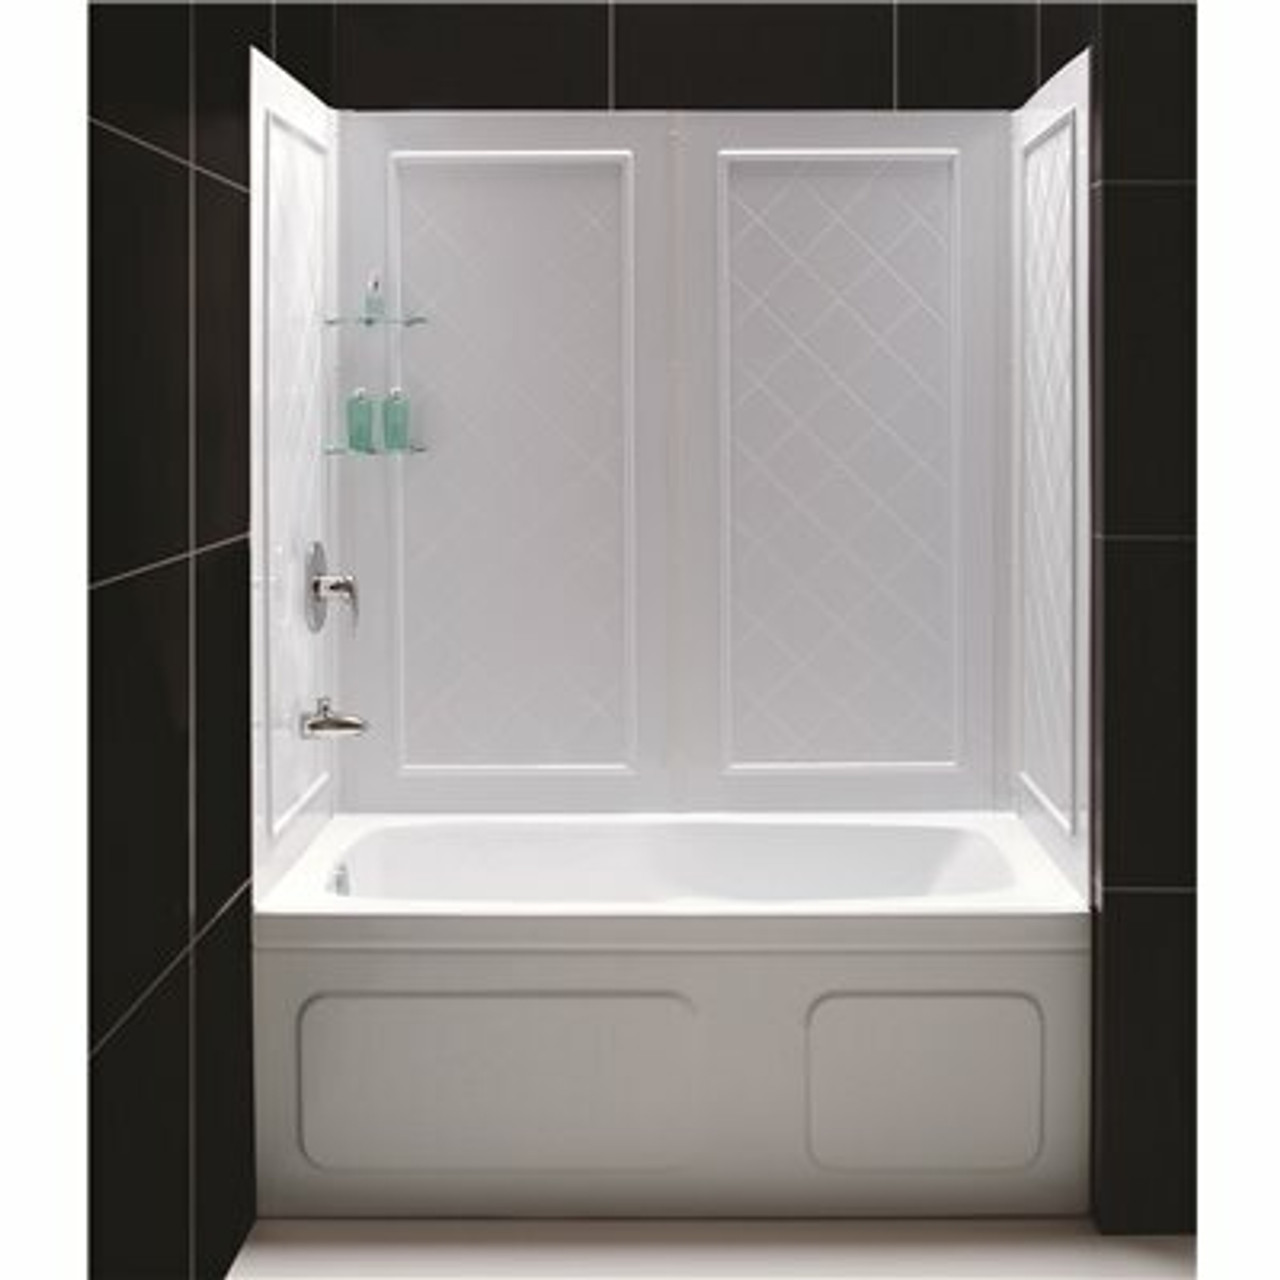 Dreamline Qwall-Tub 28-32 In. D X 56 To 60 In. W X 60 In. H 4-Piece Easy Up Adhesive Tub Surround In White